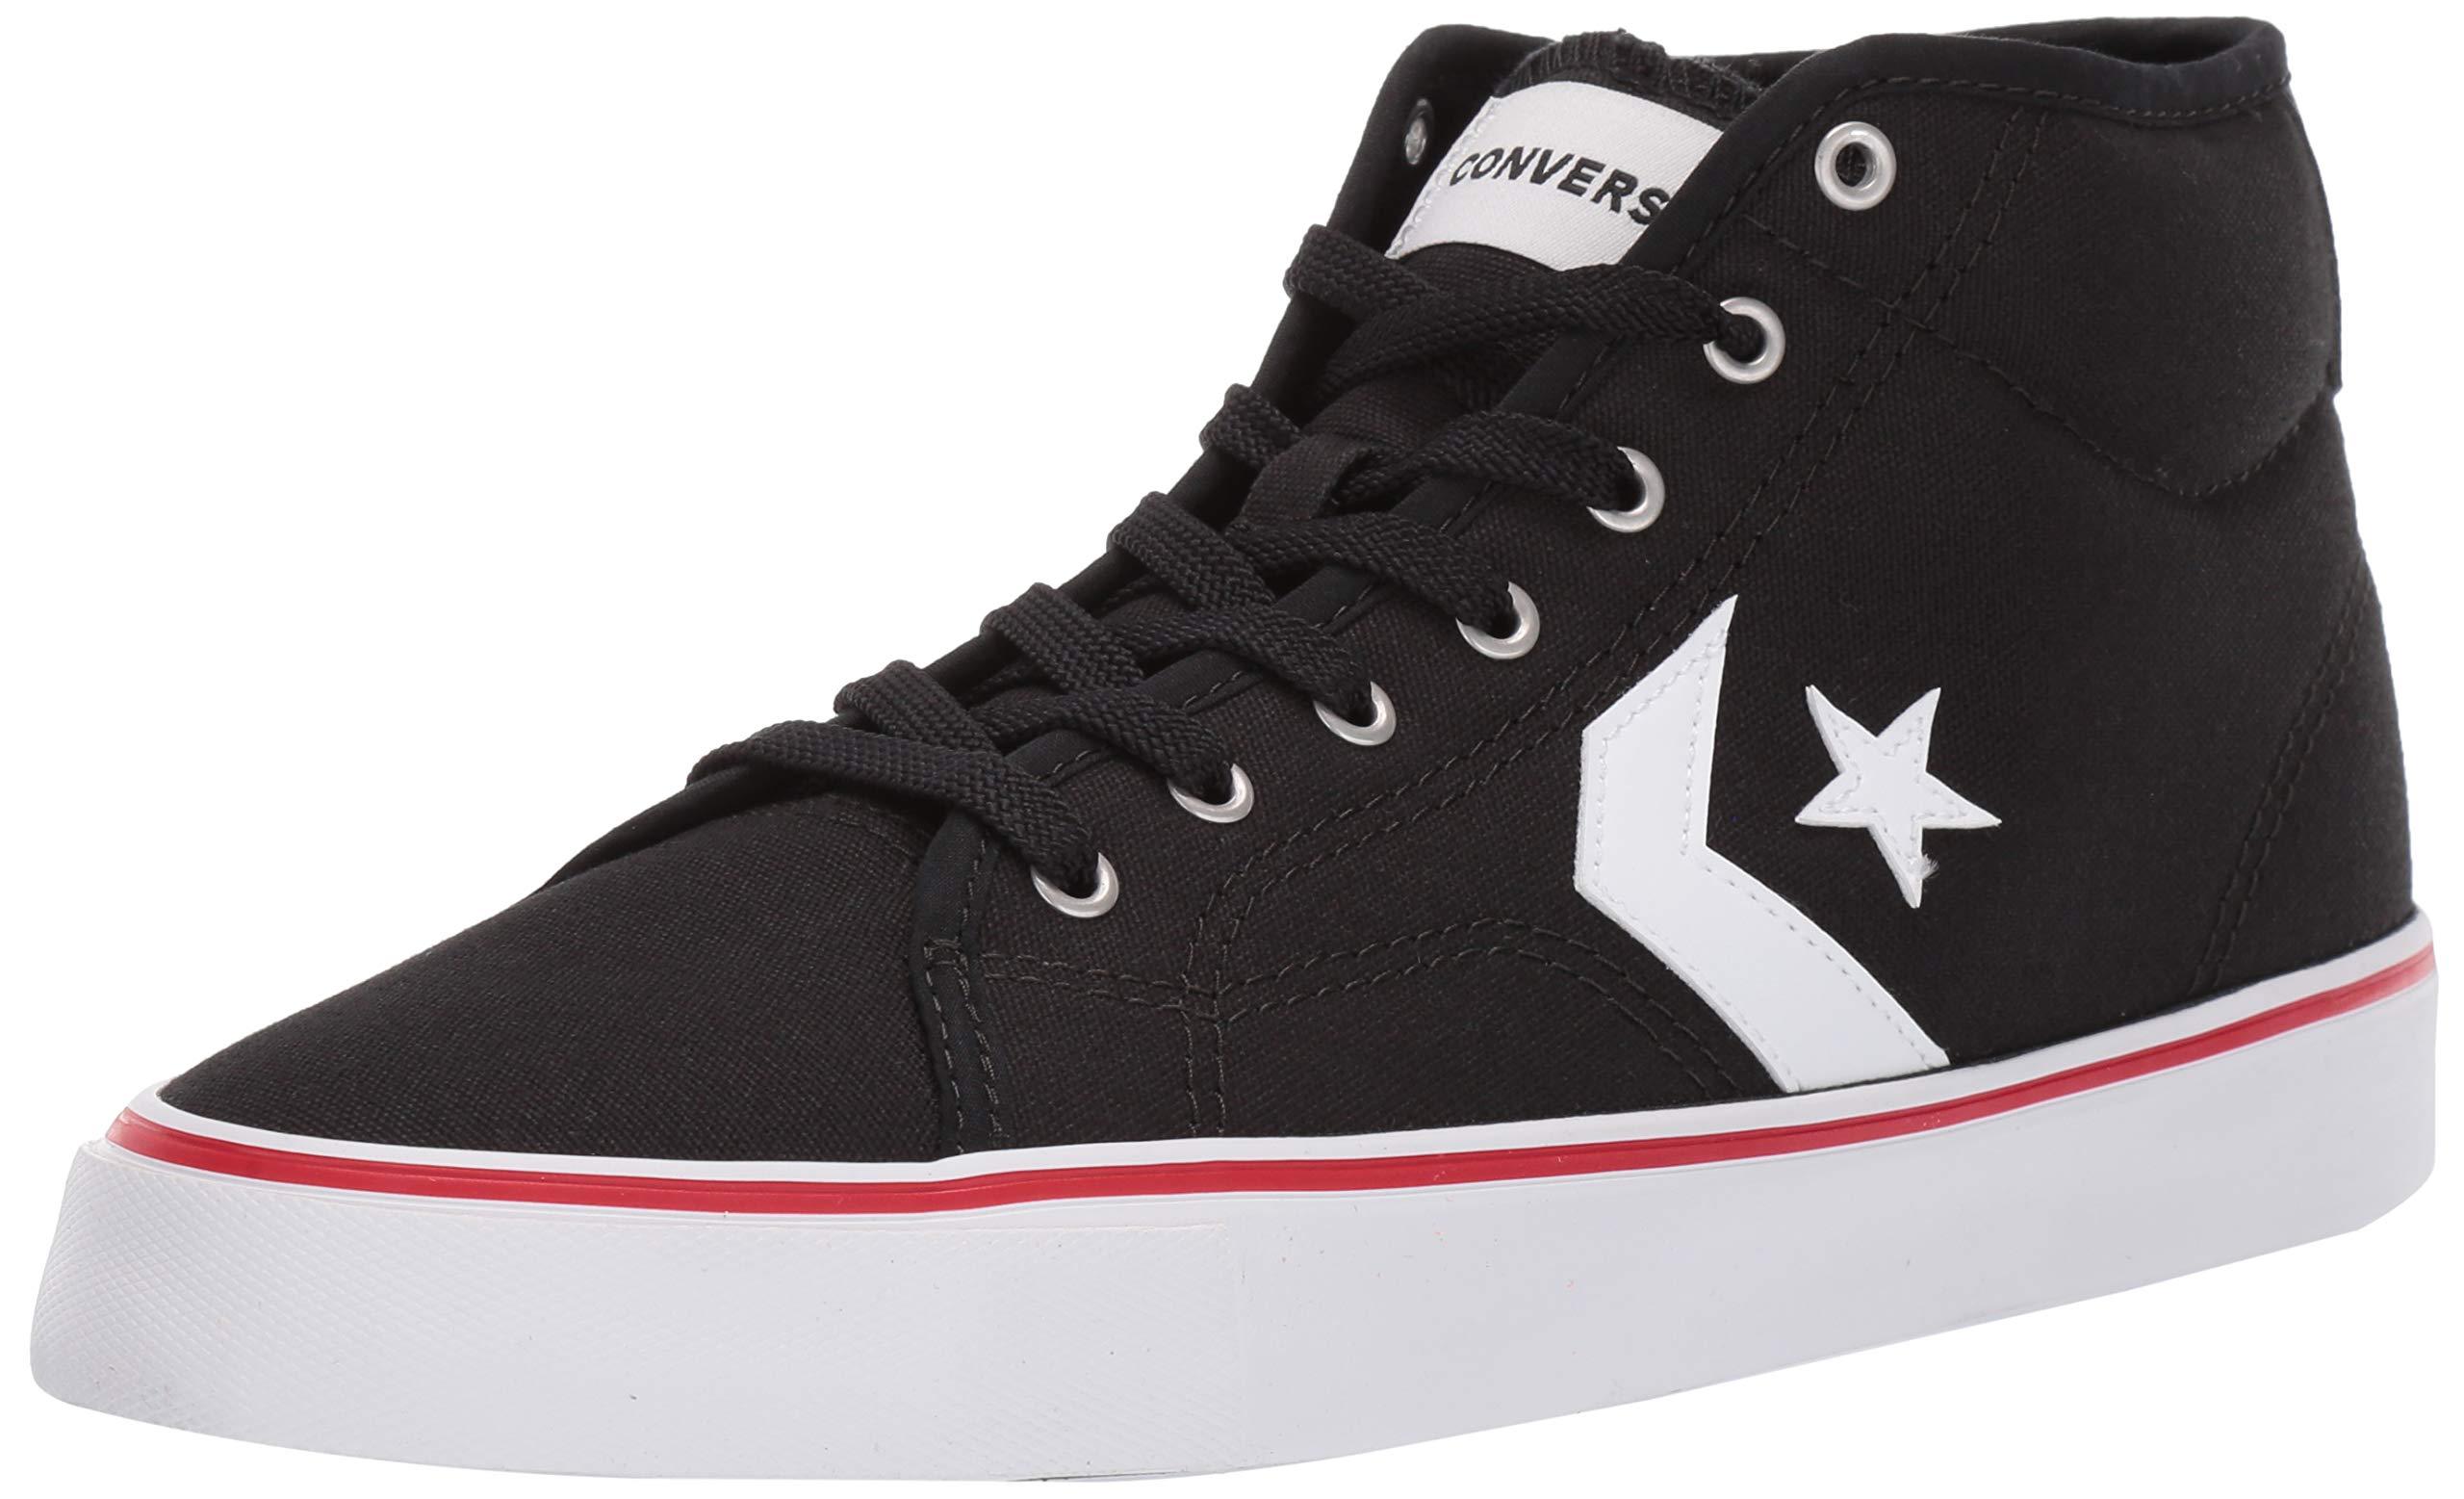 Converse Canvas Star Replay Mid Top Sneaker in Black/Black/White ...